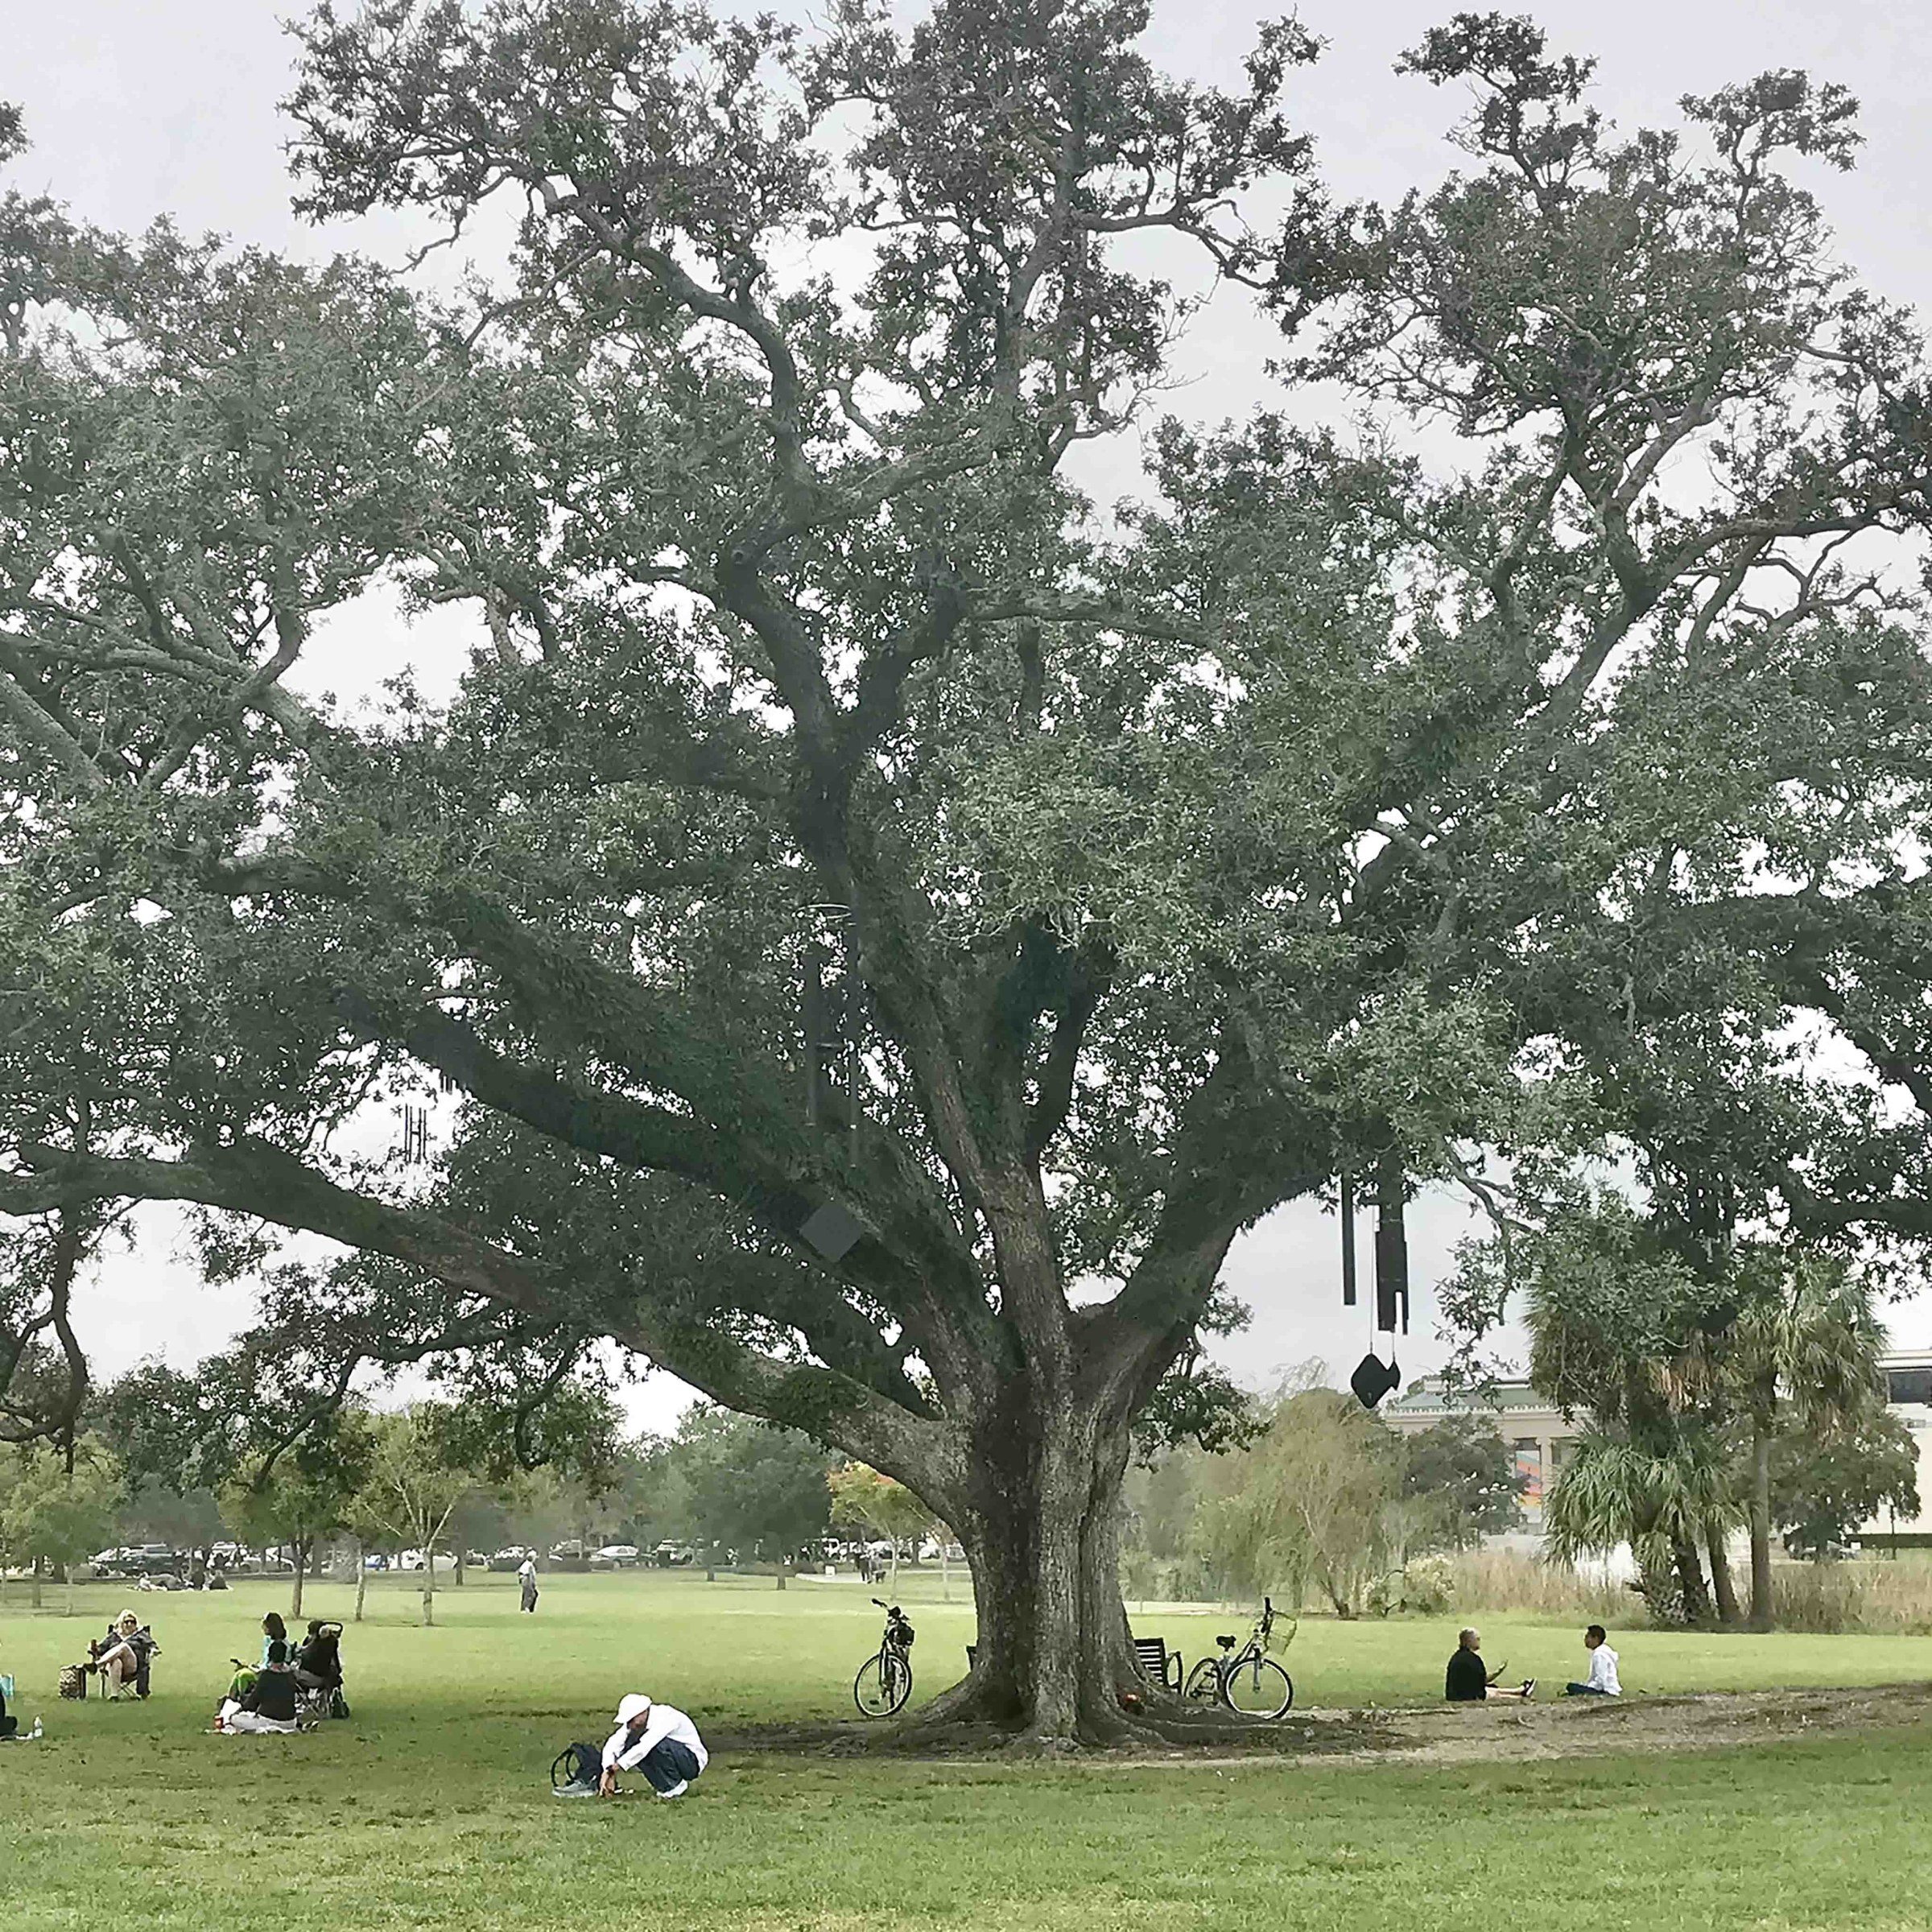 Photo of large oak tree with people sitting underneath and around